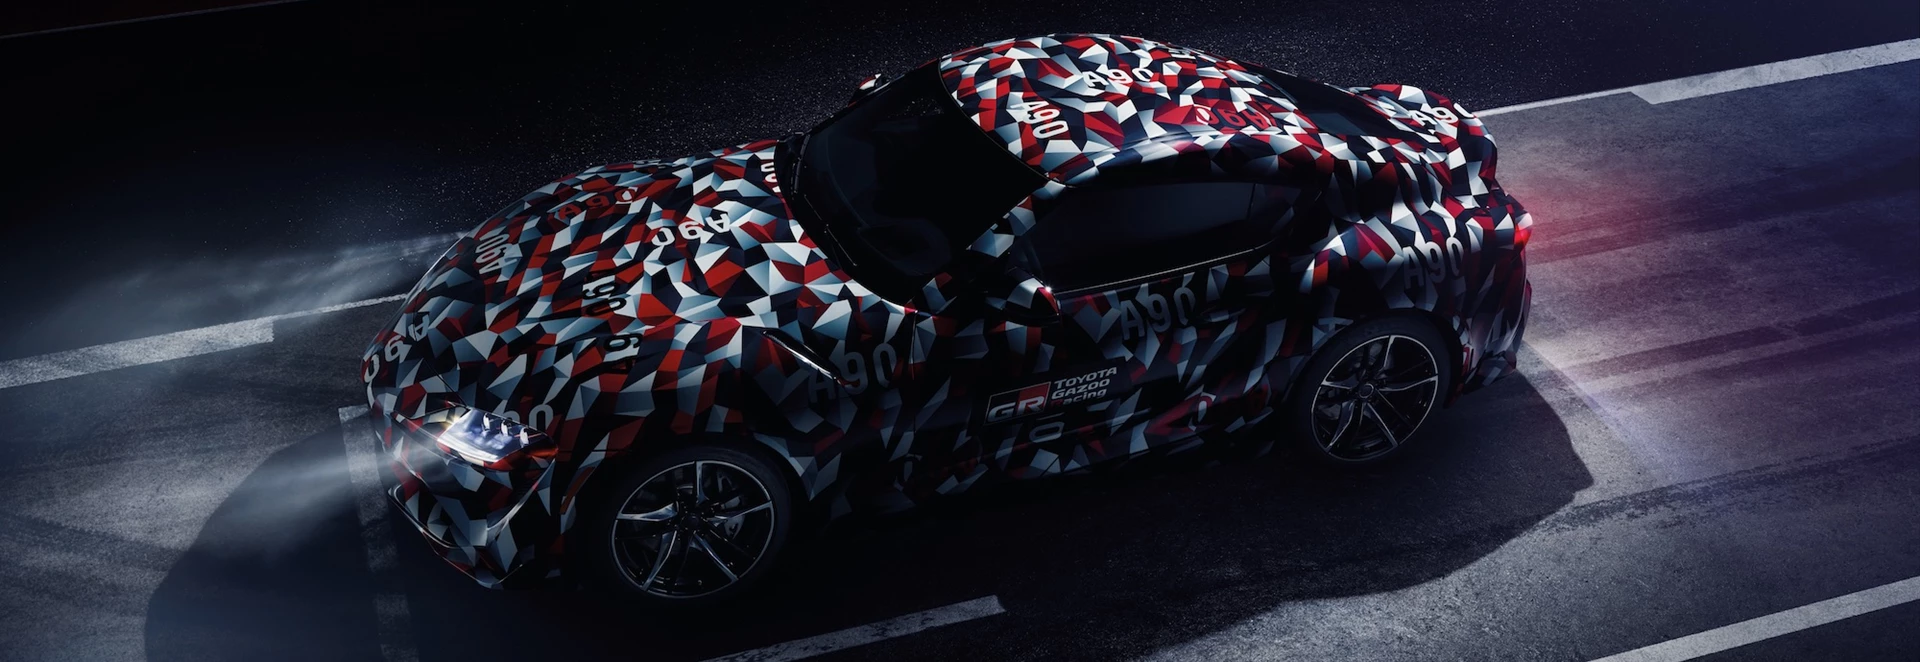 2019 Toyota Supra to come with straight-six engine